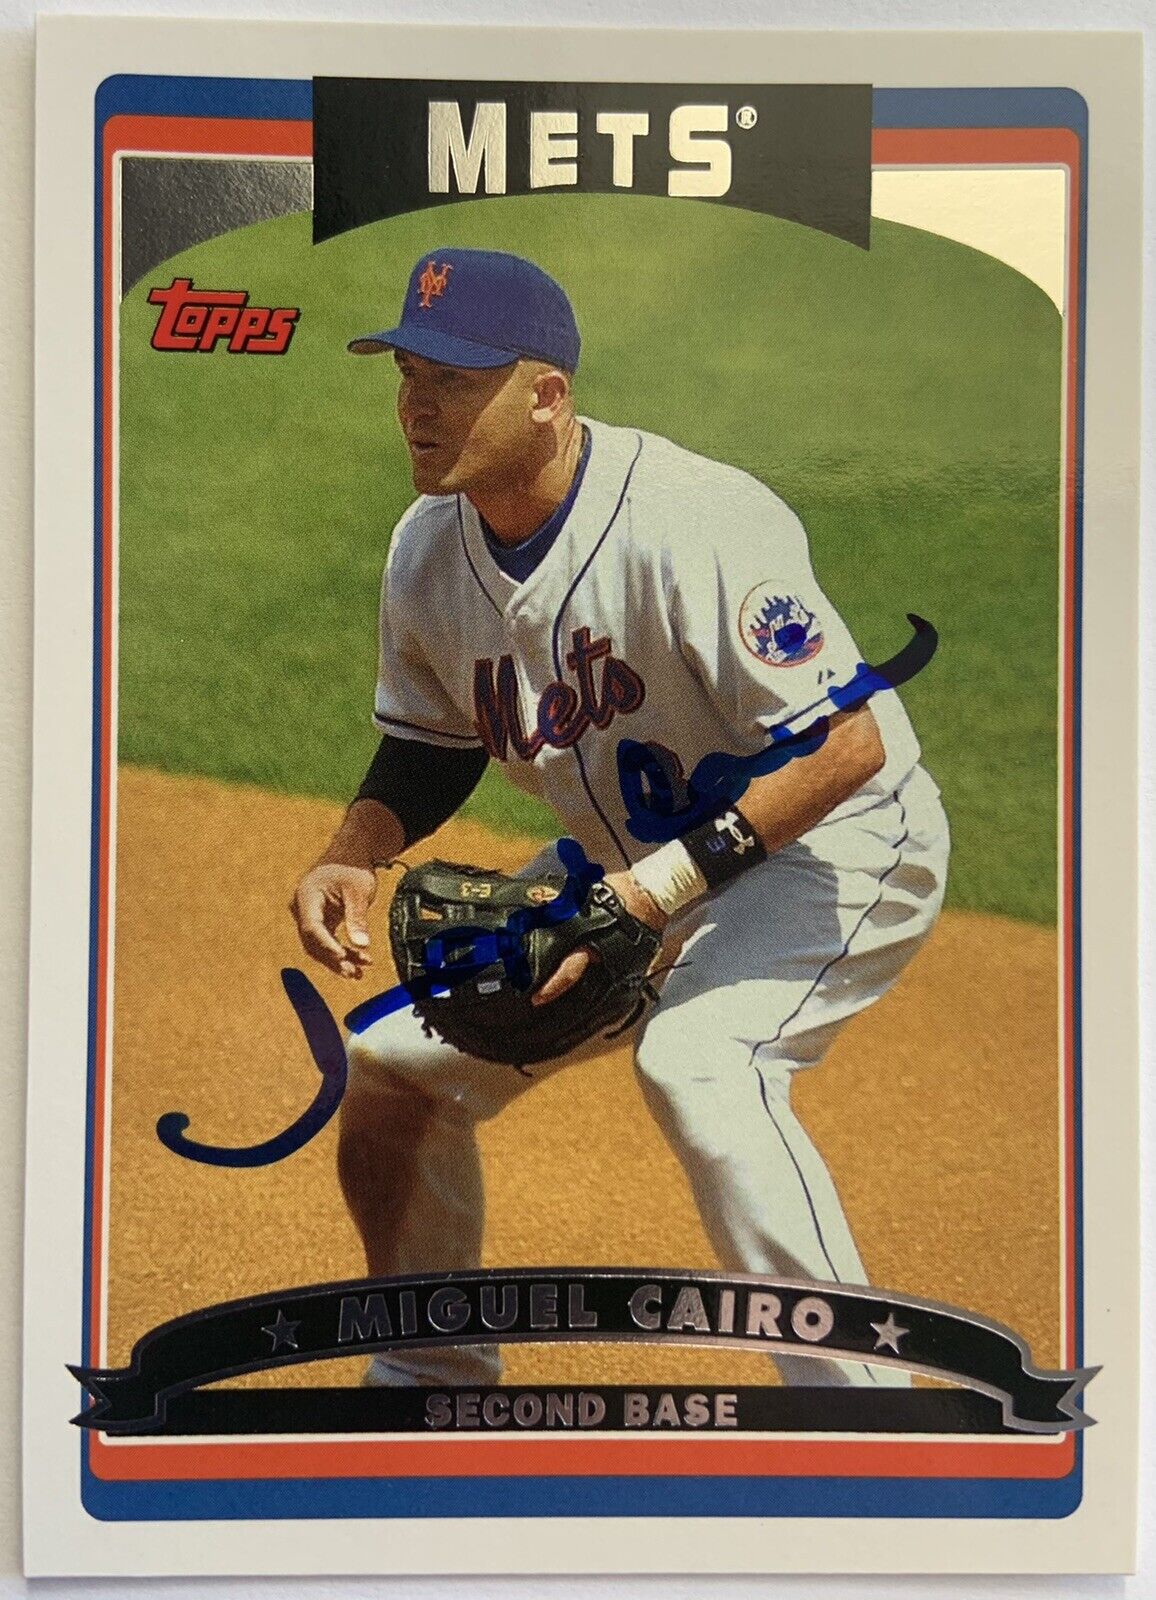 Miguel Cairo New York Mets Signed Autographed 2006 Topps Baseball Card #204 COA